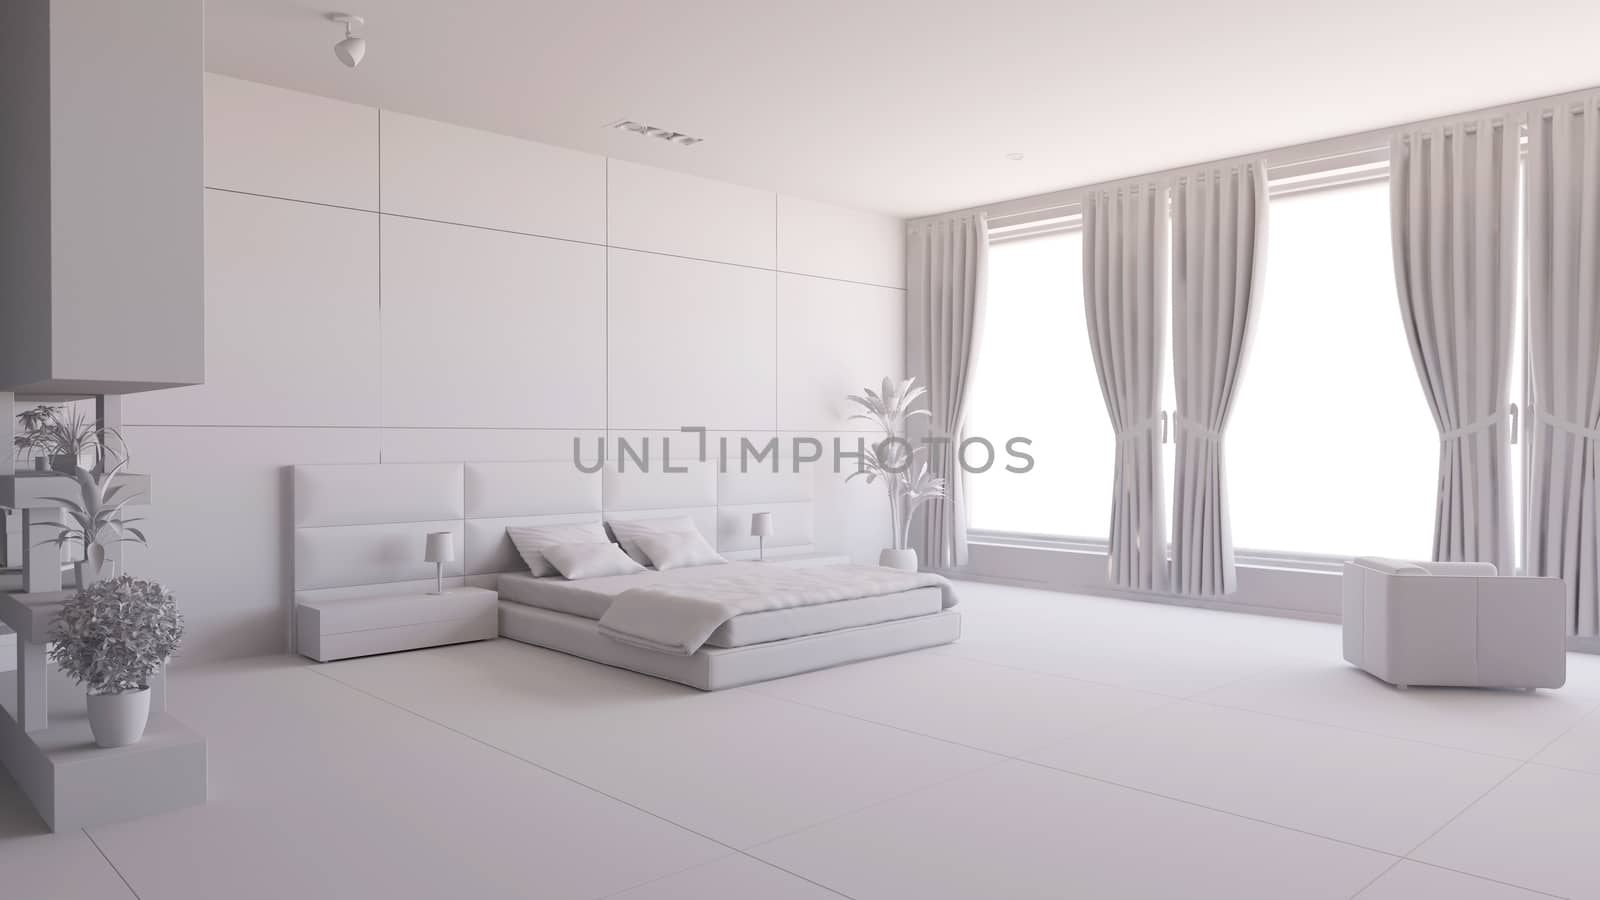 Render of a bedroom with some furniture by enrico.lapponi